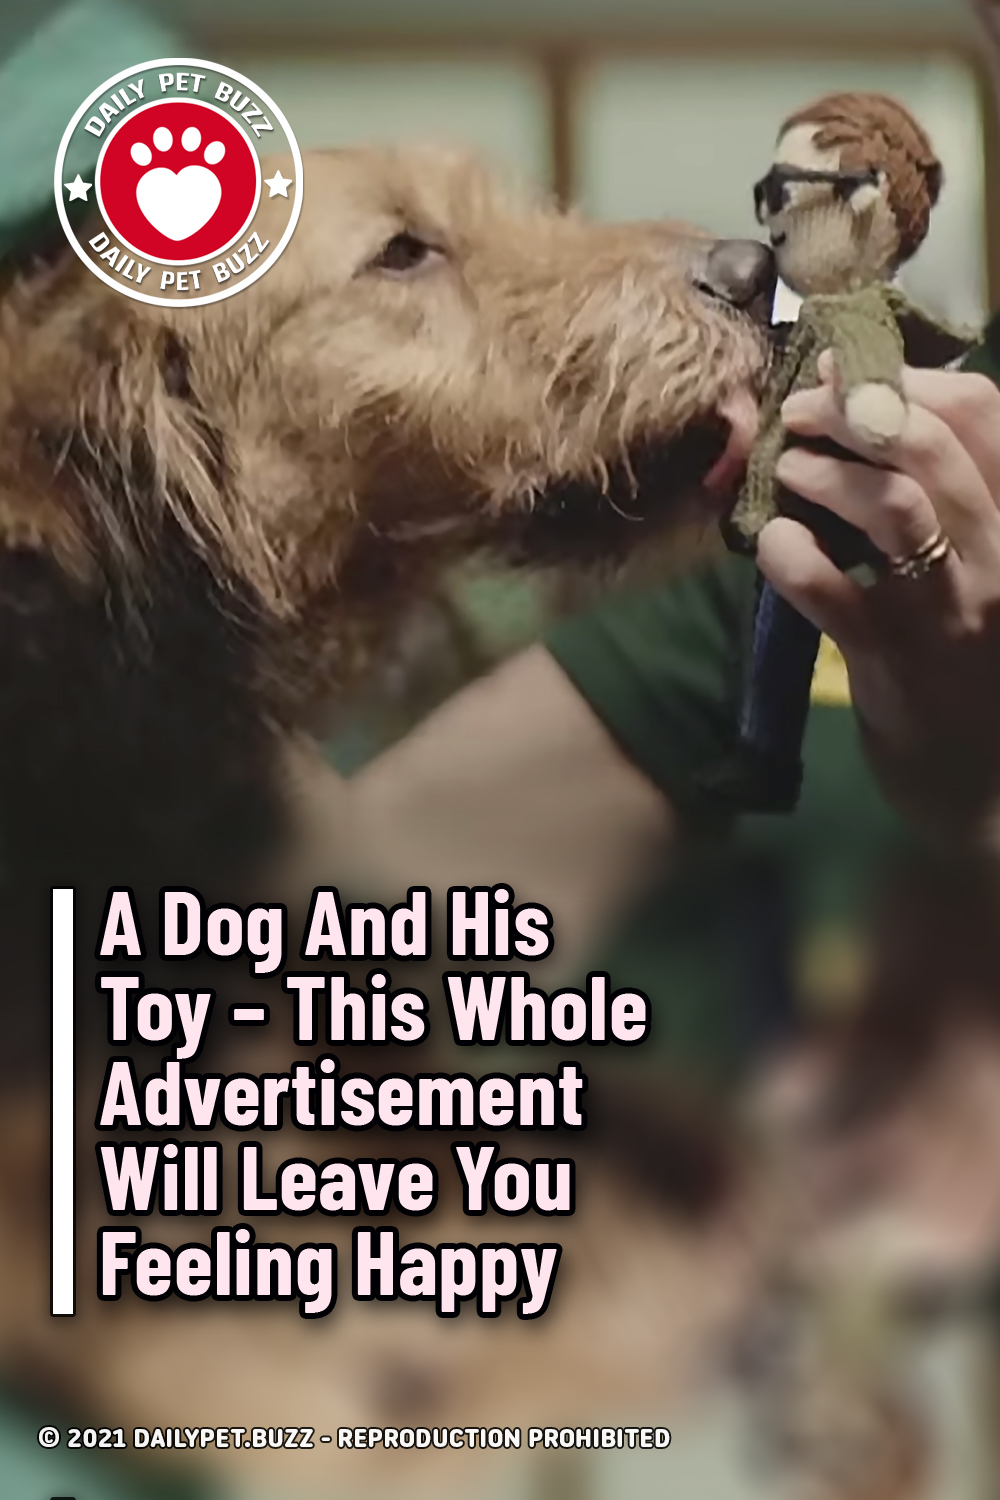 A Dog And His Toy – This Whole Advertisement Will Leave You Feeling Happy